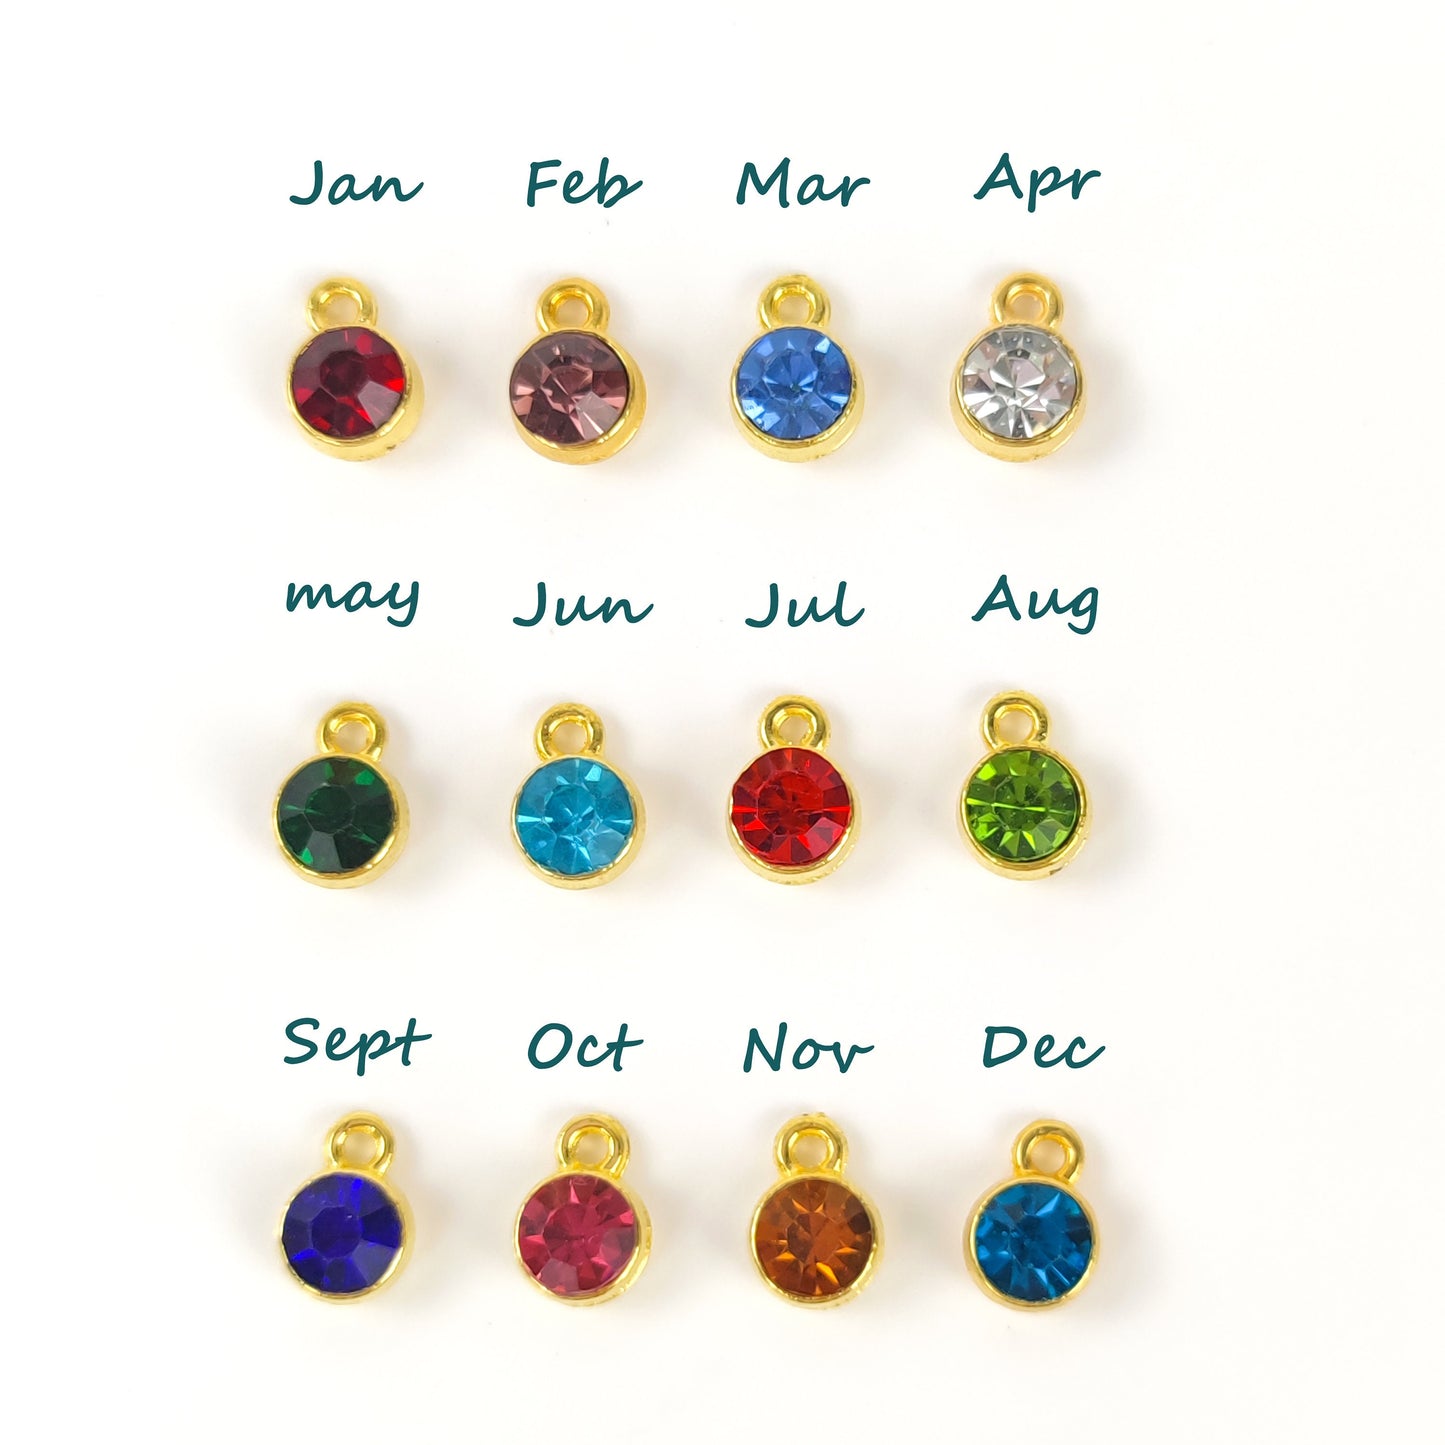 Birth Stone Accessories | Match Dried Pressed Flowers Jewelry  | Personalized Gift For Women